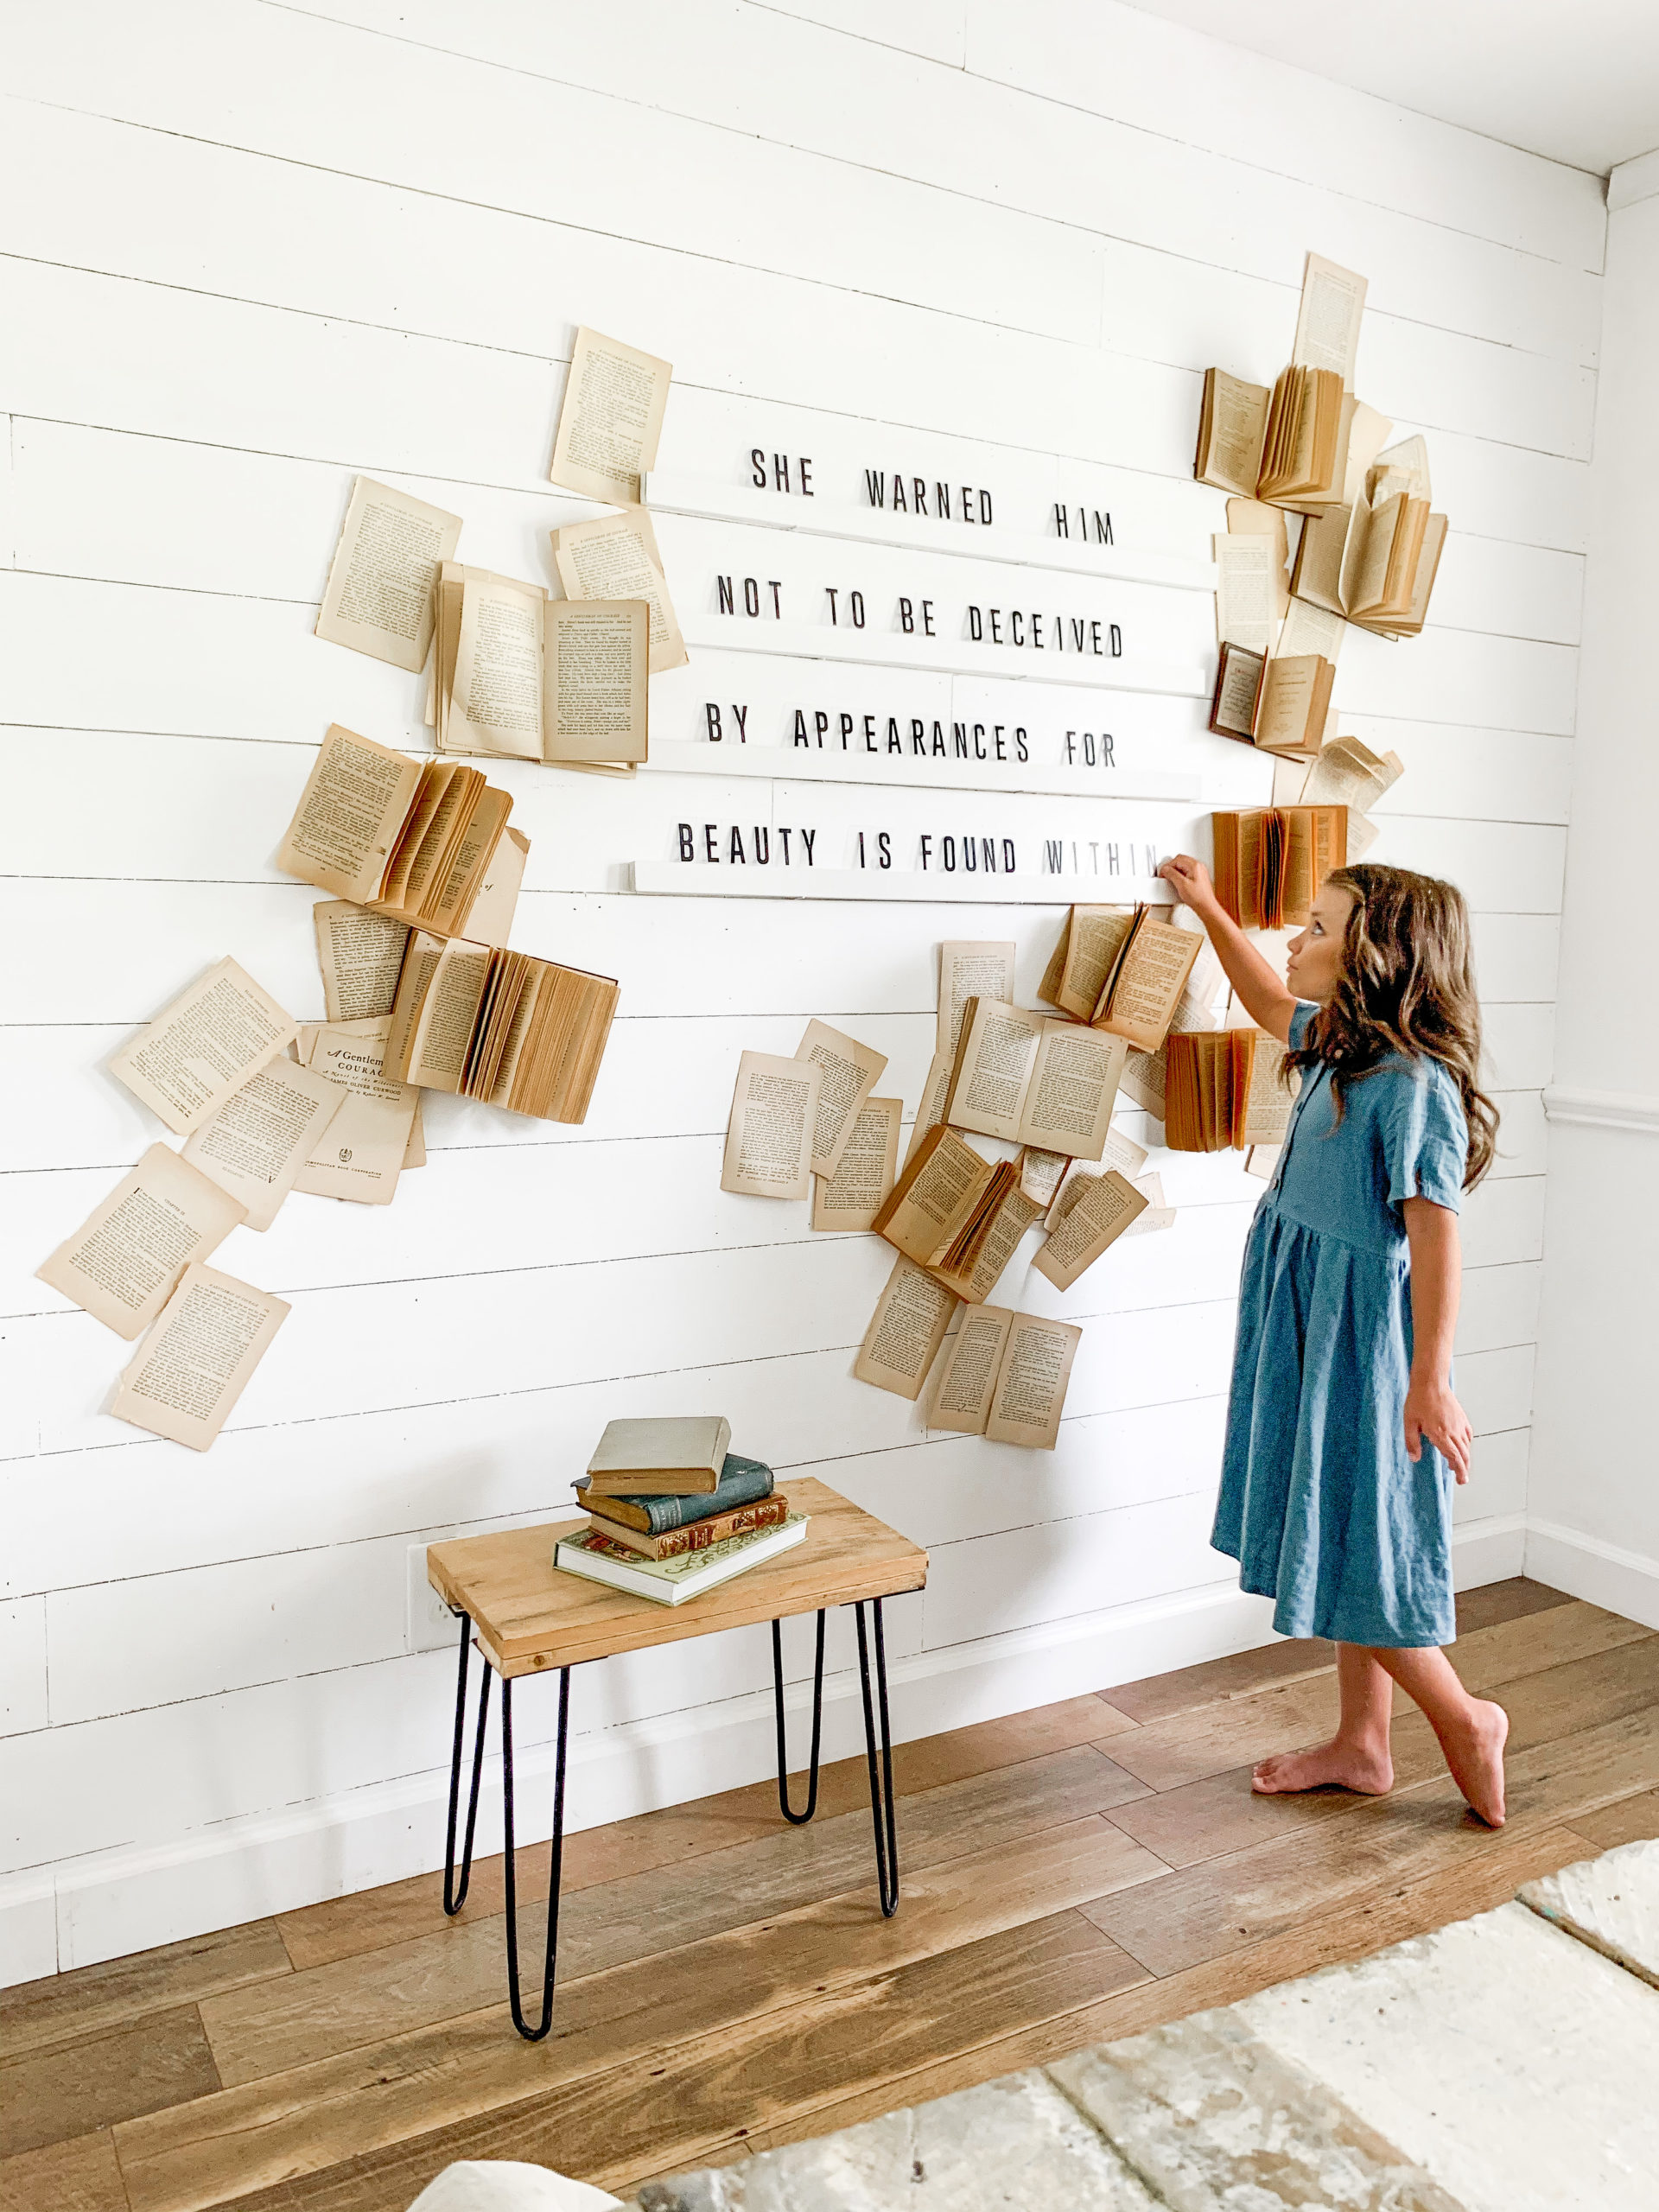 How To Make An Epic DIY Book Wall & Letter Board Display